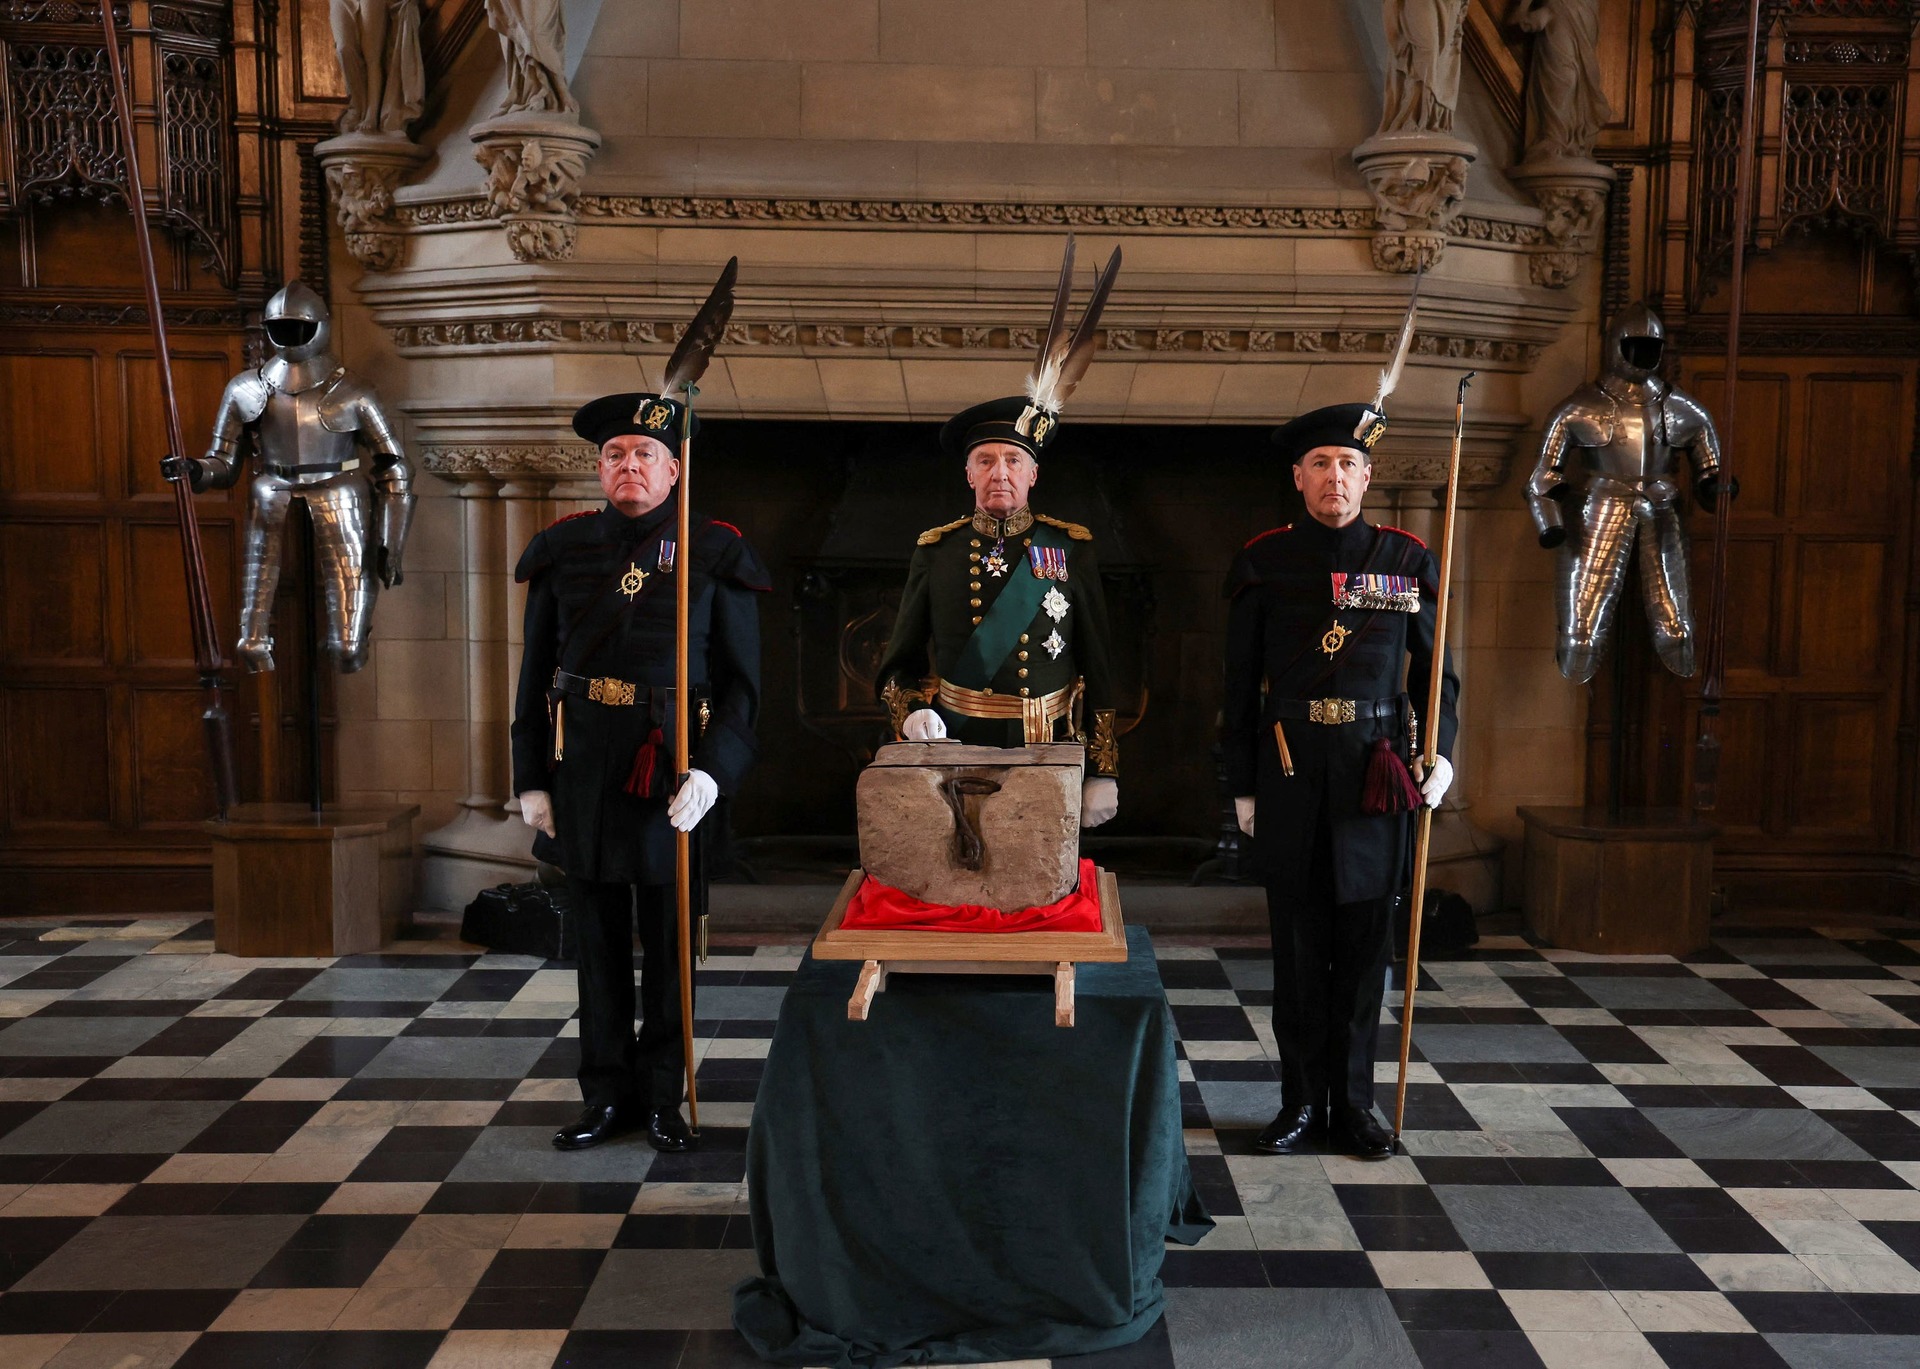 The Duke of Buccleuch, flanked by two Officers of Arms, stands beside the Stone of Destiny.